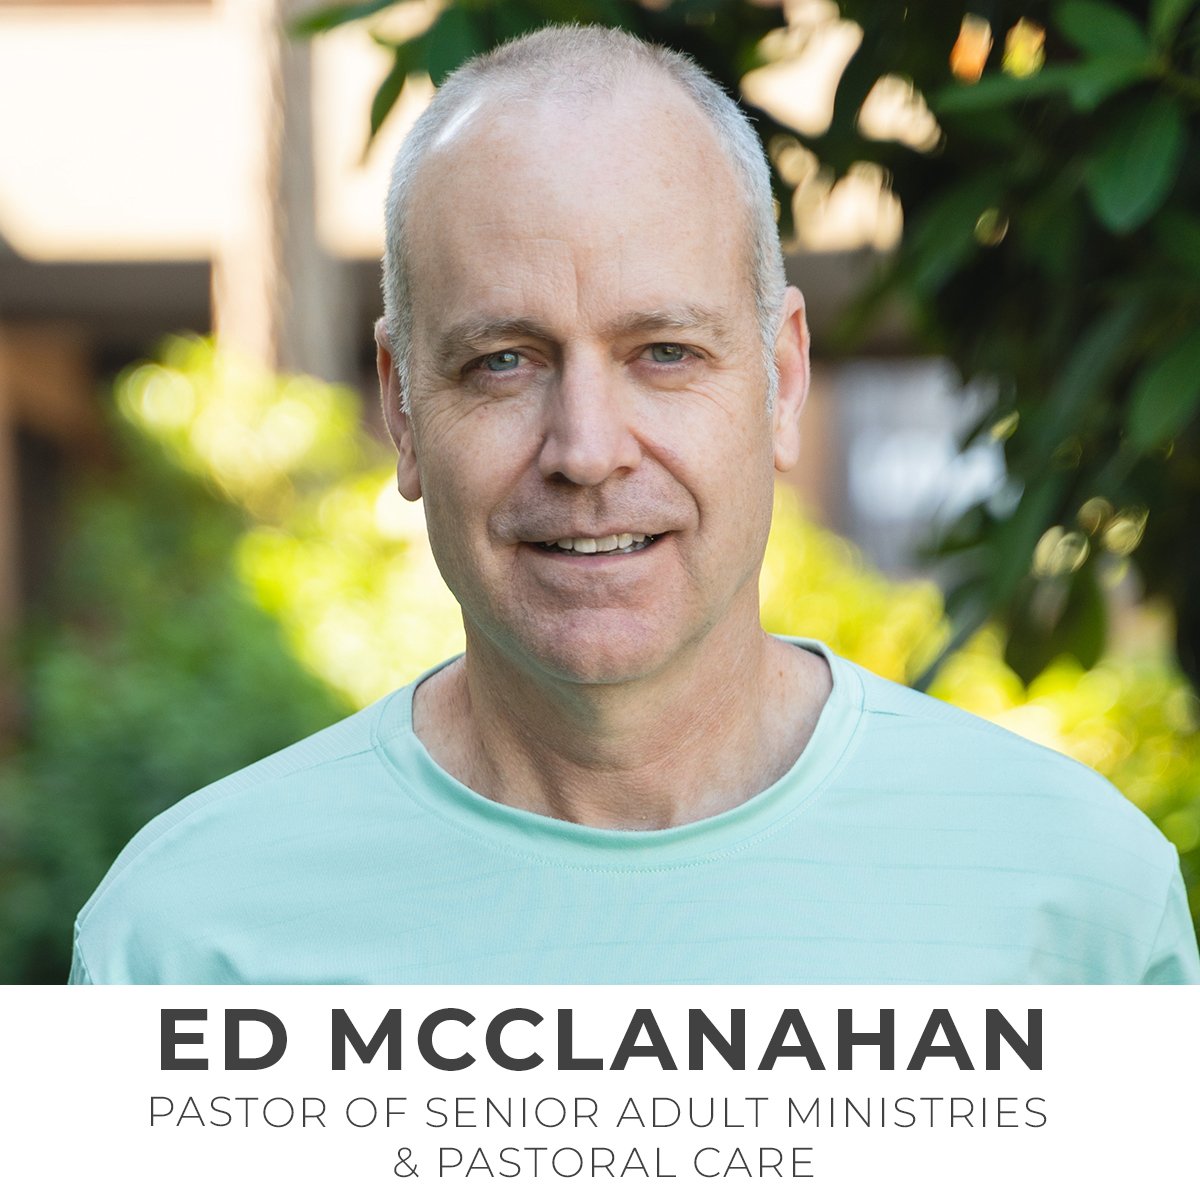 Ed McClanahan, Pastor of Senior Adult Ministries and Pastoral Care